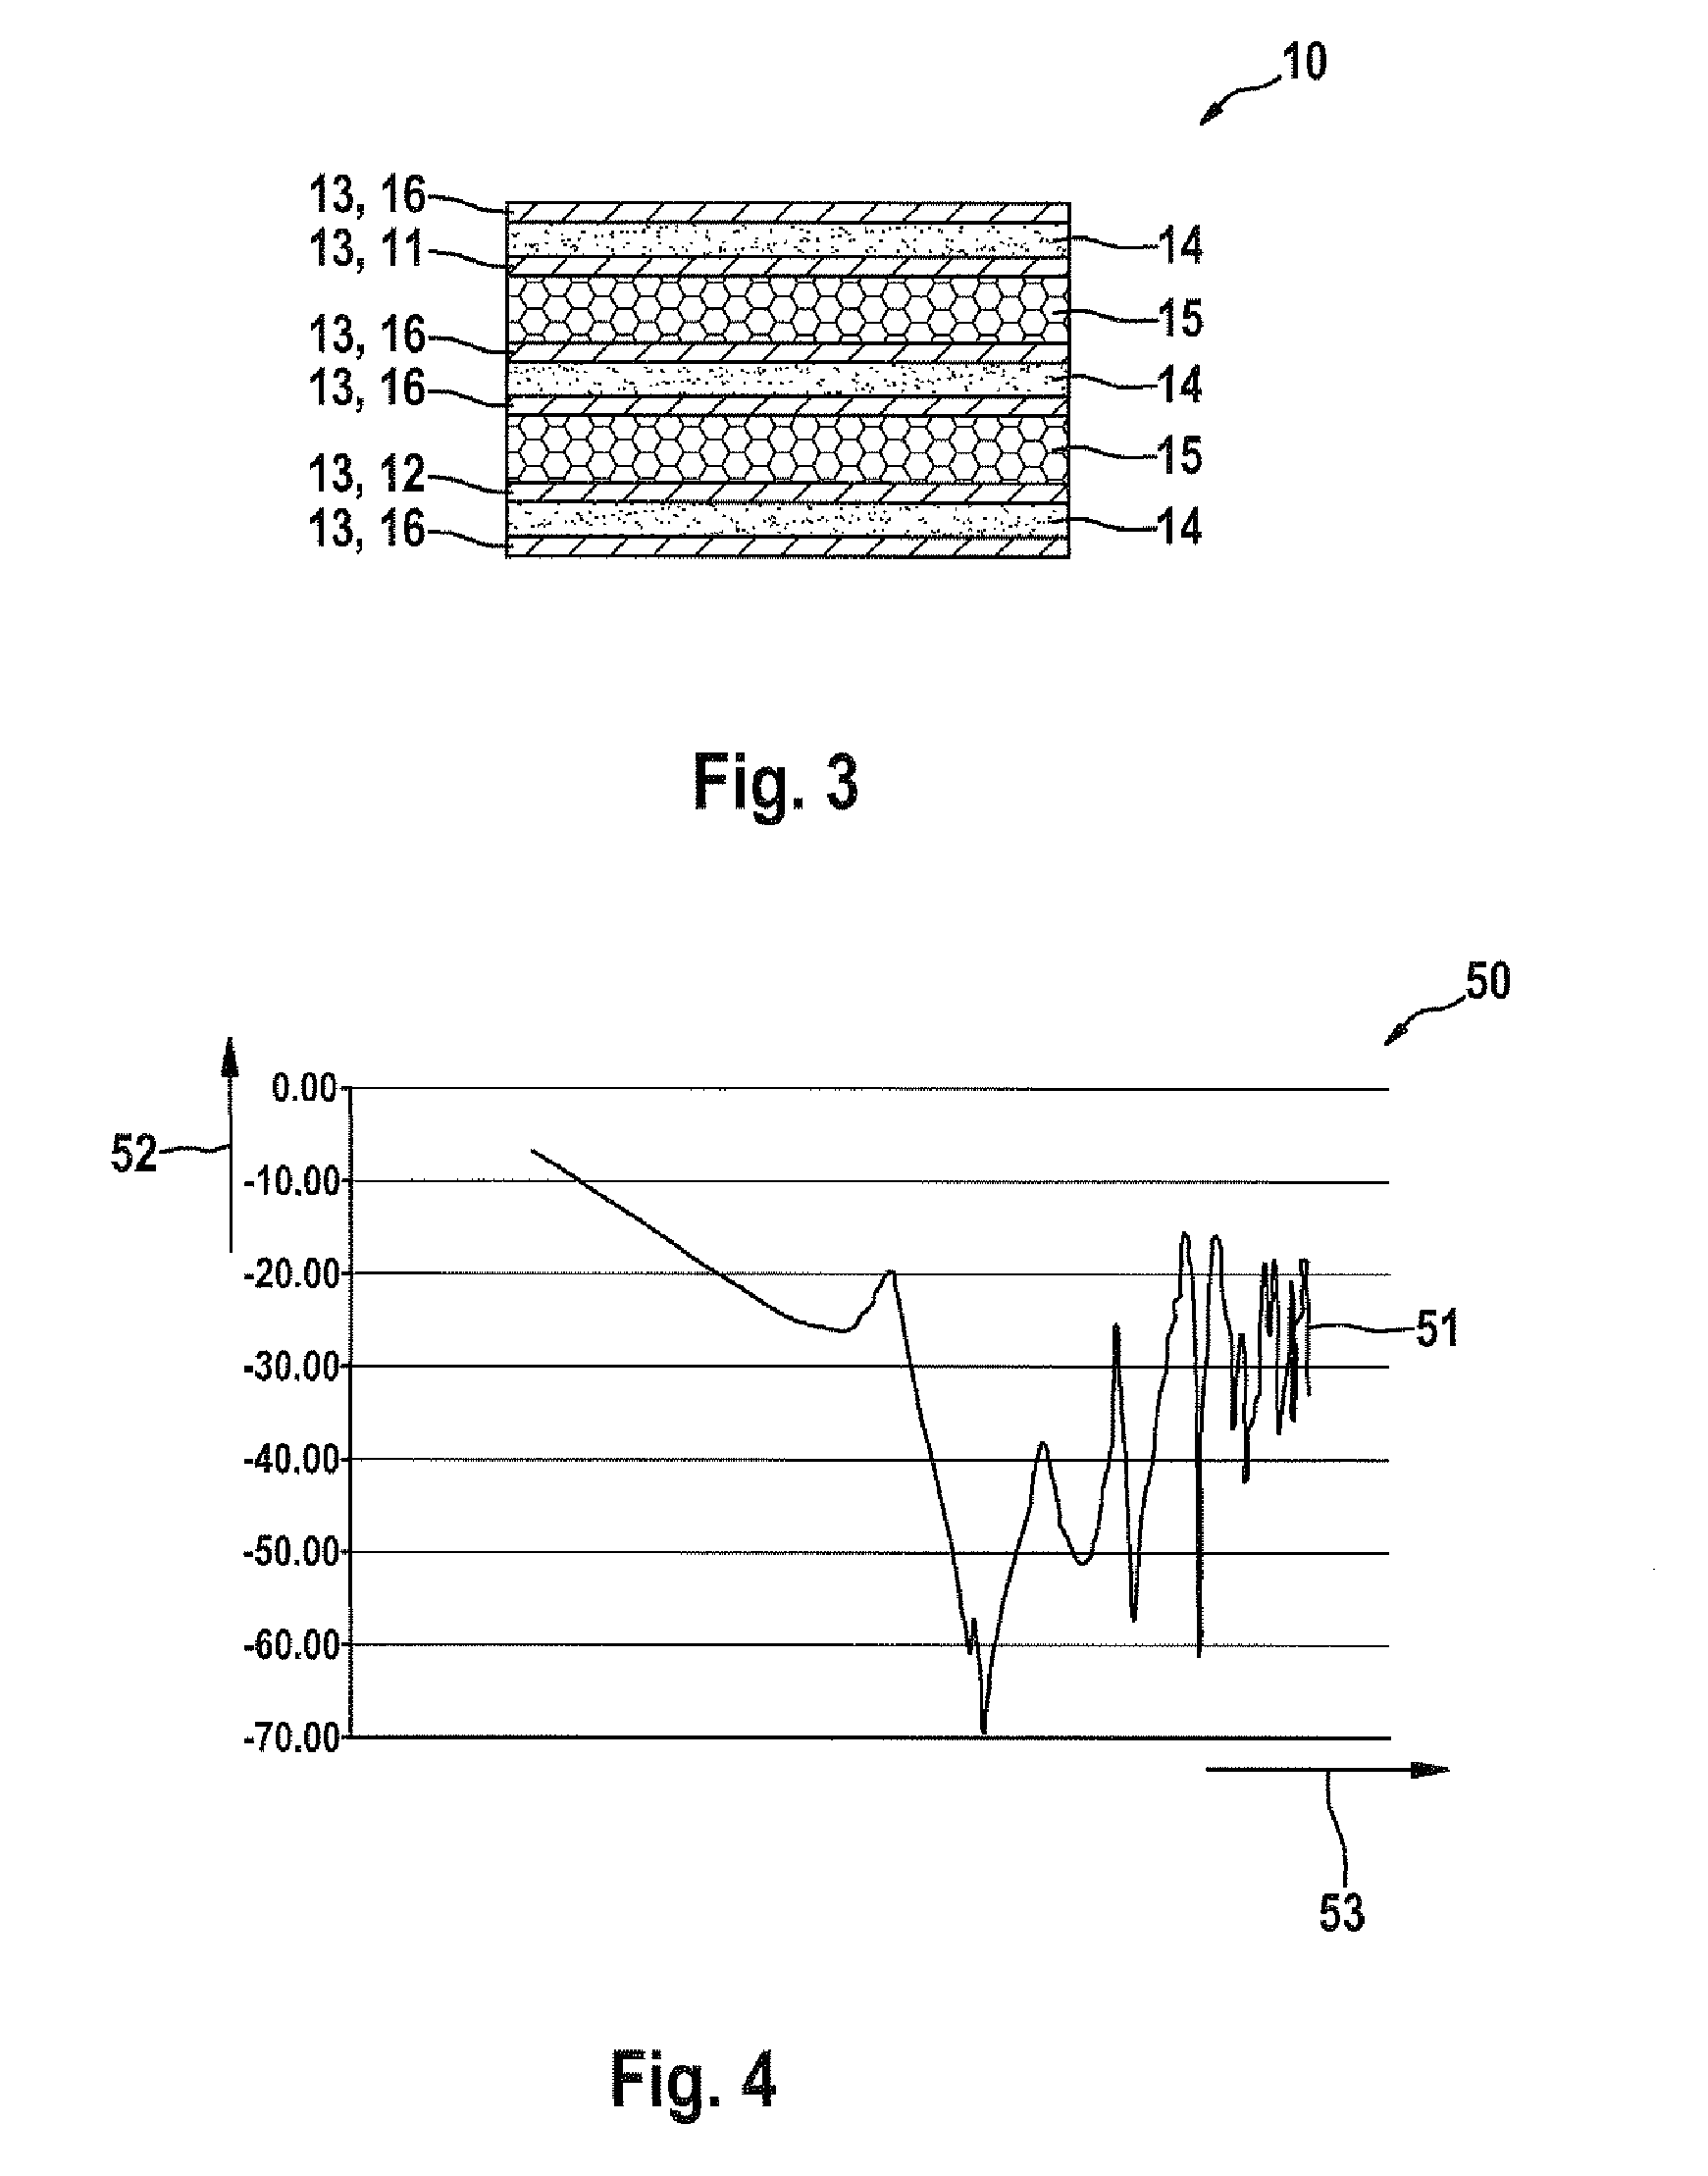 Protection device against electromagnetic interference